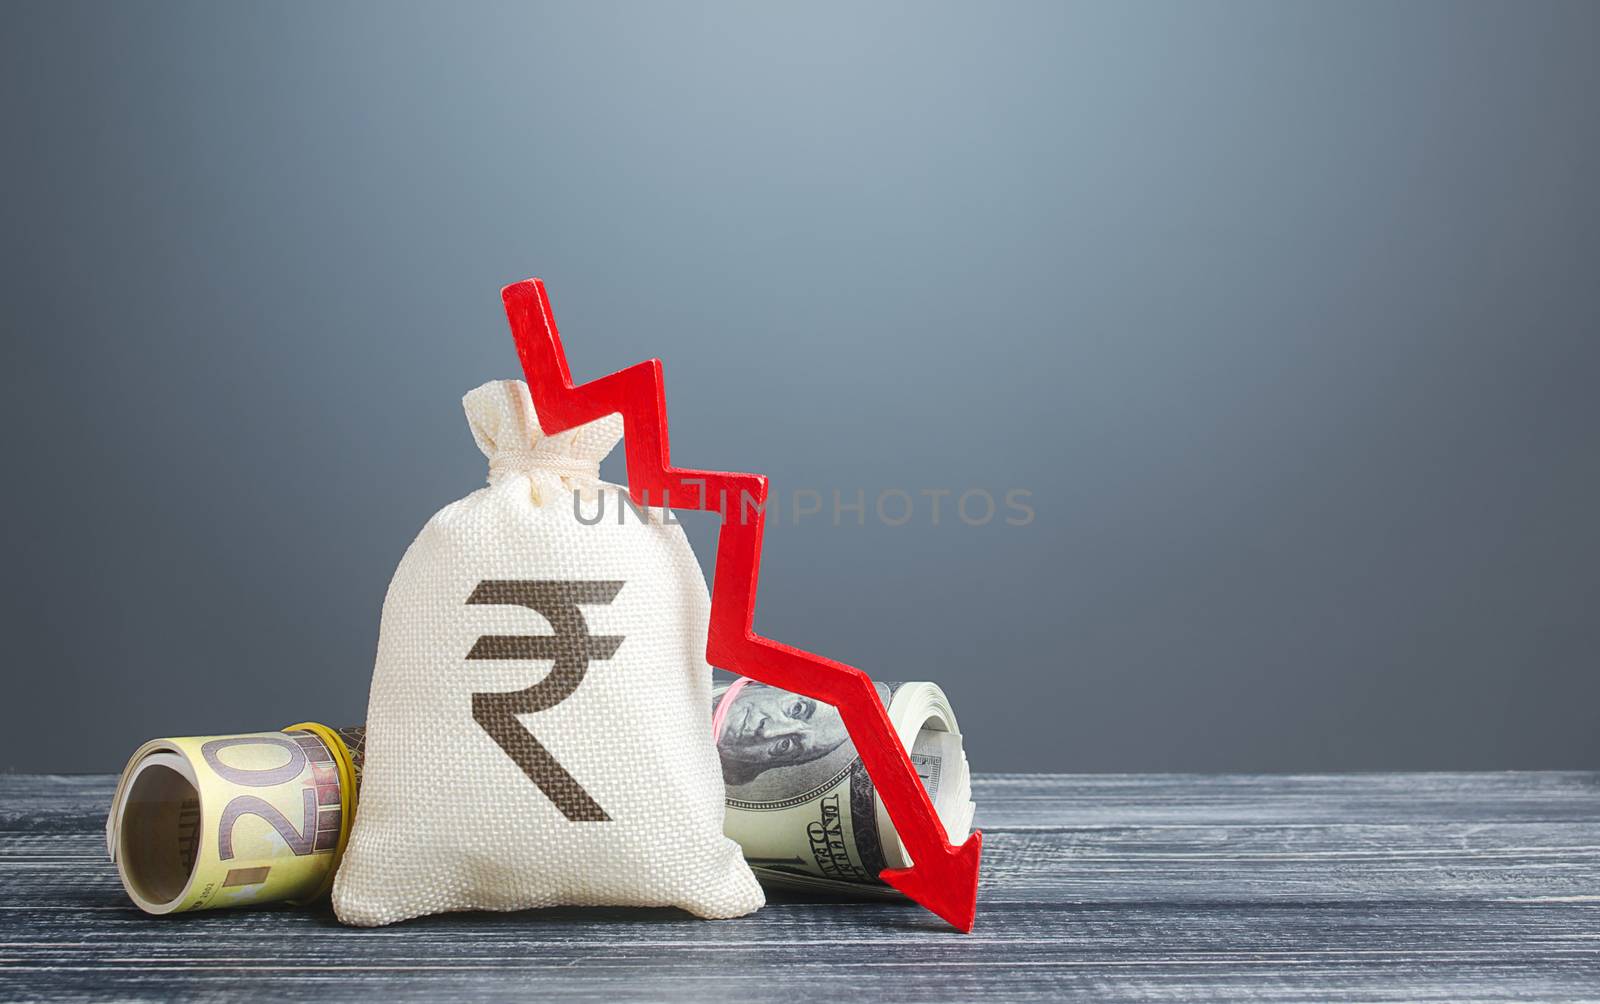 Indian rupee money bag and red arrow down. Economic difficulties. Capital flight, high risks. Costs expenses. Crisis, loss savings. Stagnation, recession, declining business activity, falling wealth. by iLixe48